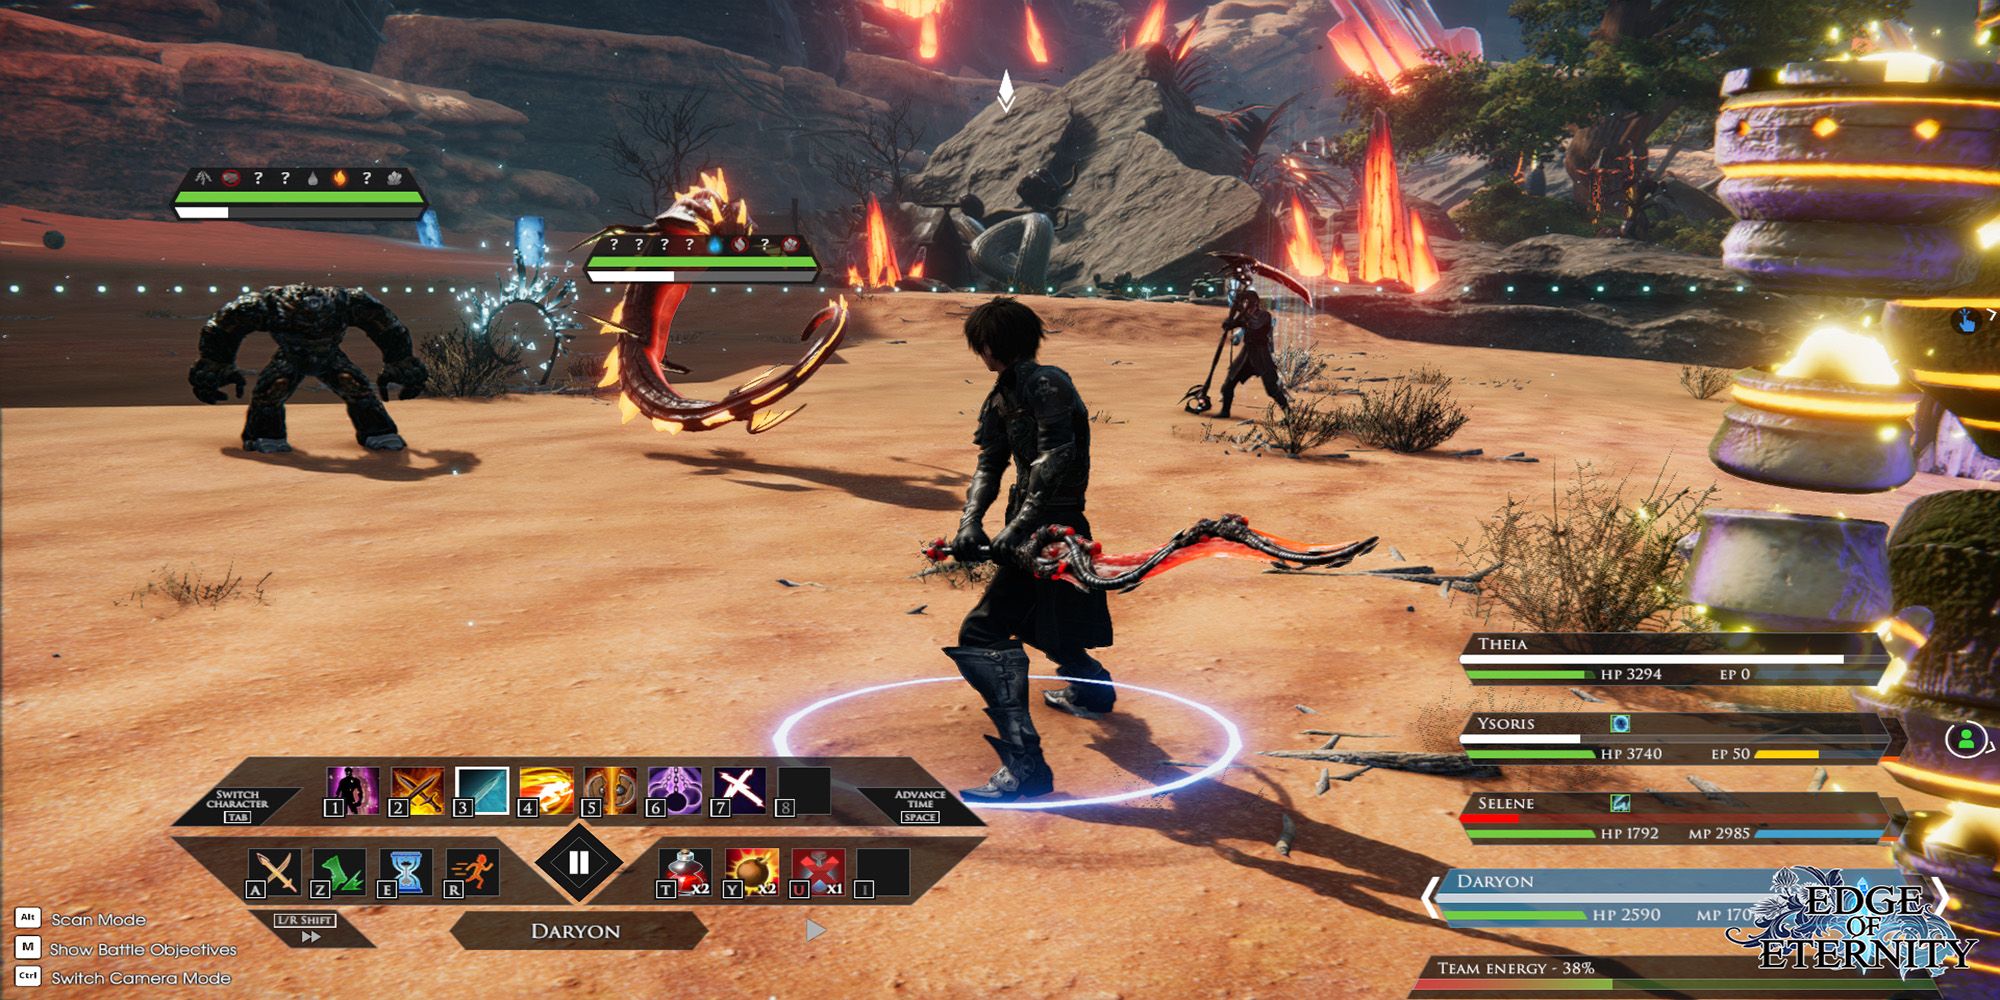 A close-up shot of a battle between Daryon, Ysoris, and other party members against a Gurrn and a dragon-like creature.